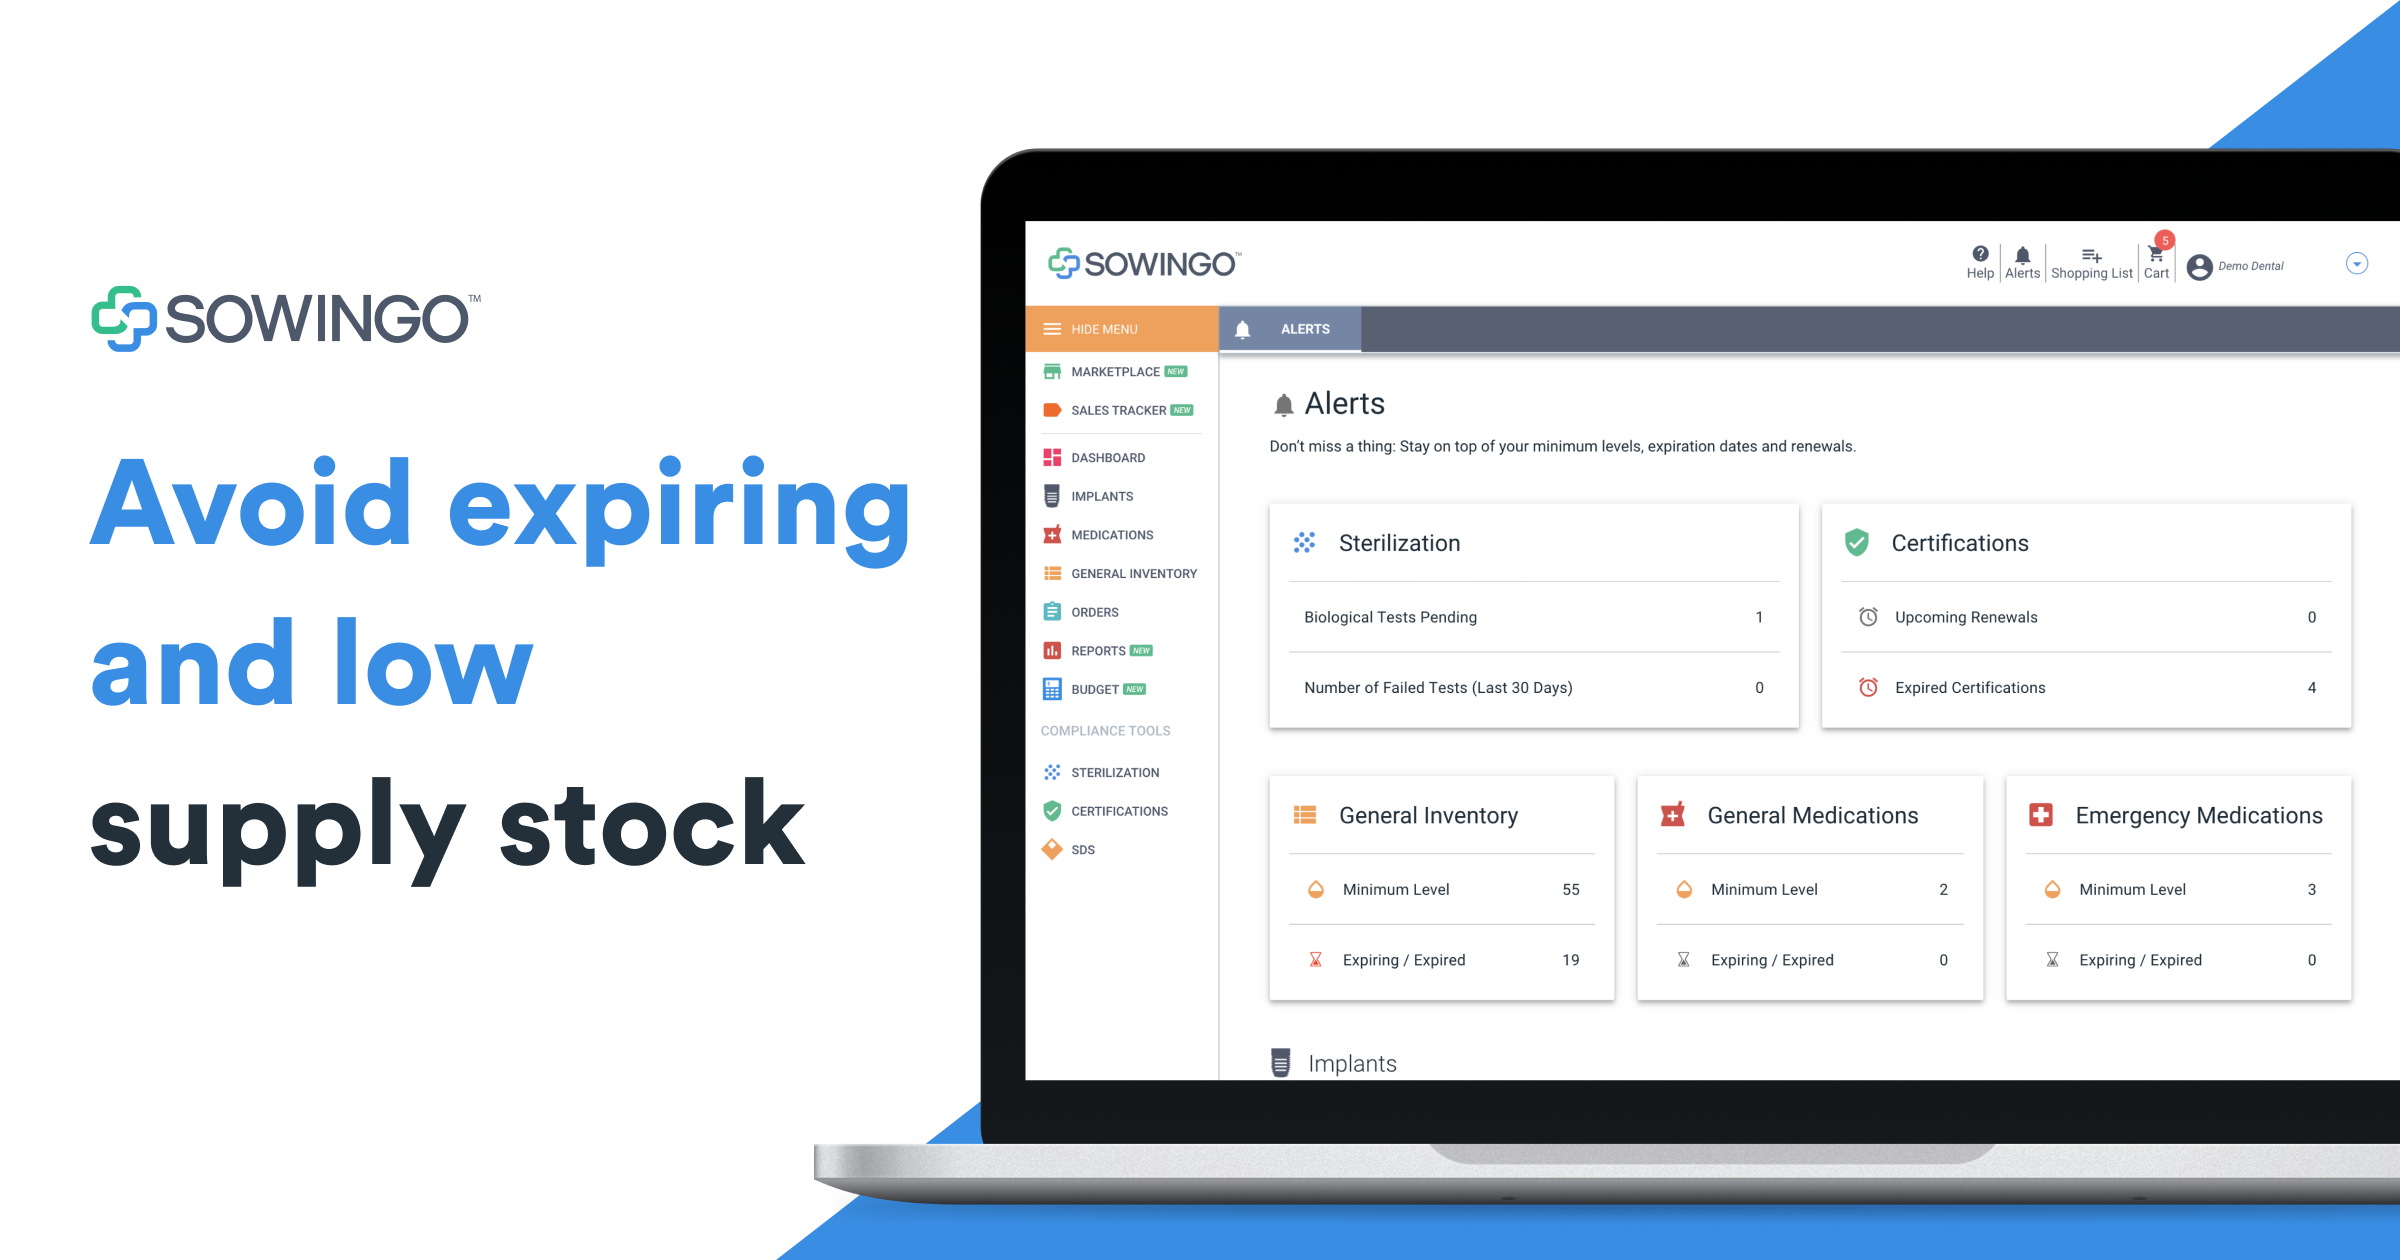 Sowingo Software - Empower your practice by connecting your inventory to real-time data and alerts for low inventory and expiring products to easily shop with the click of a button.